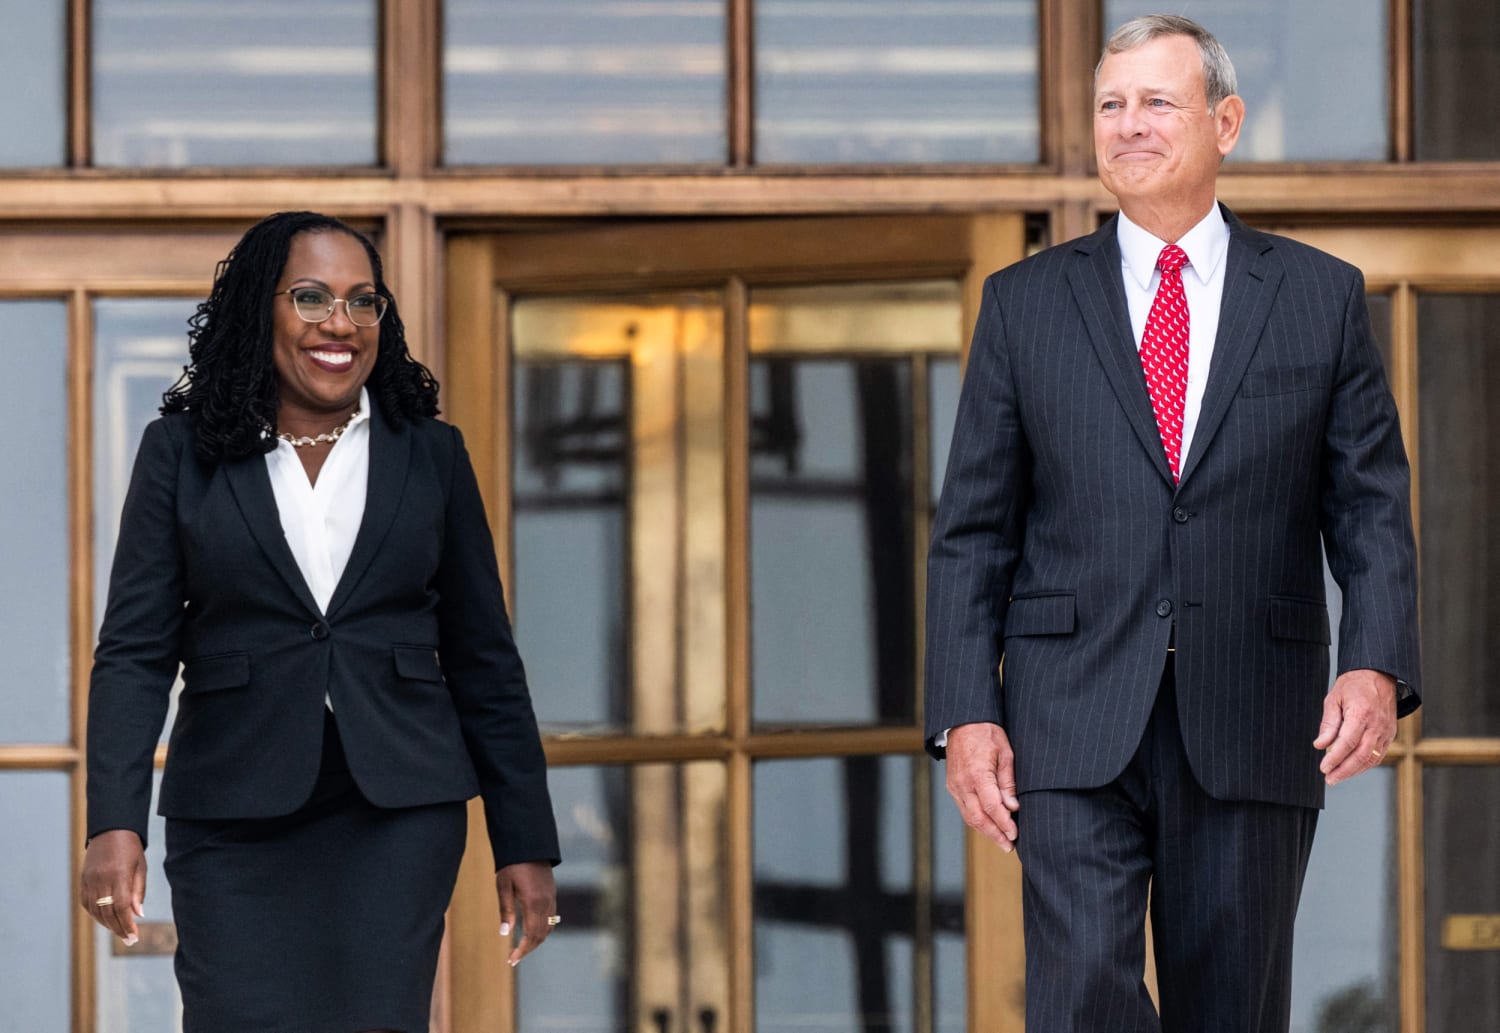 Justice Jackson makes waves in first Supreme Court arguments